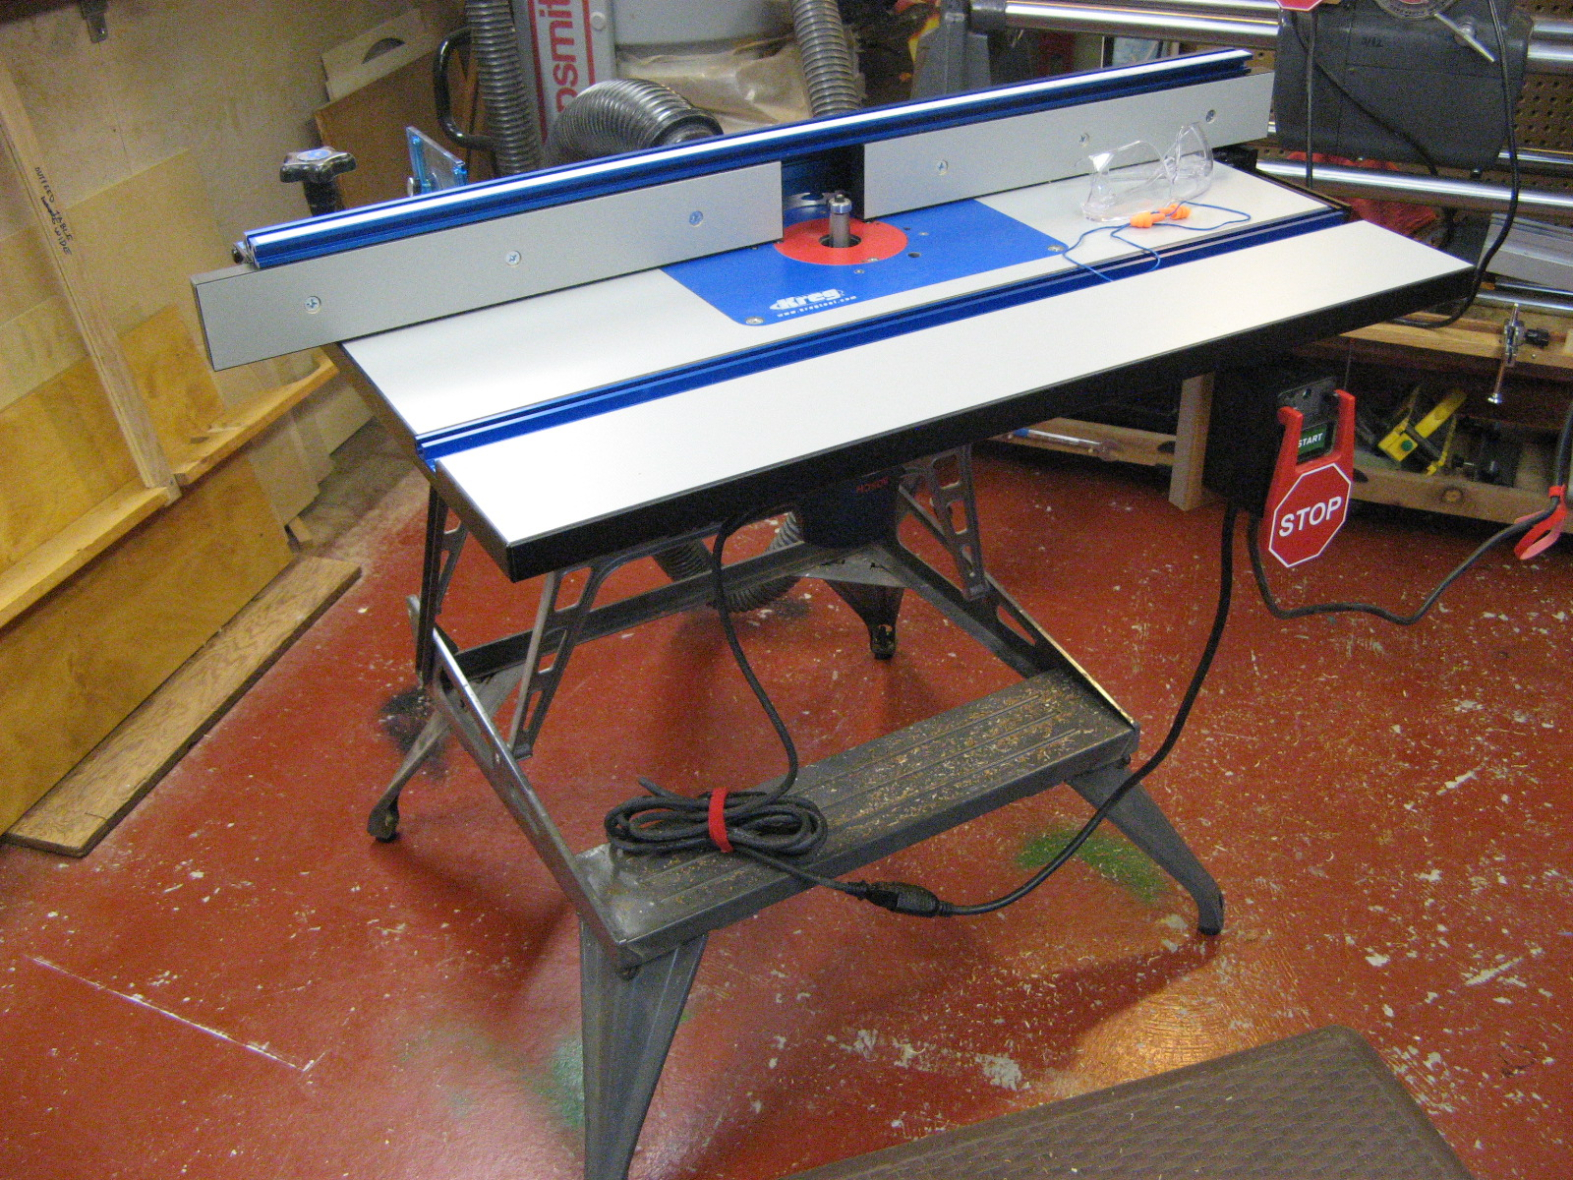 Table mounted to Workmate.